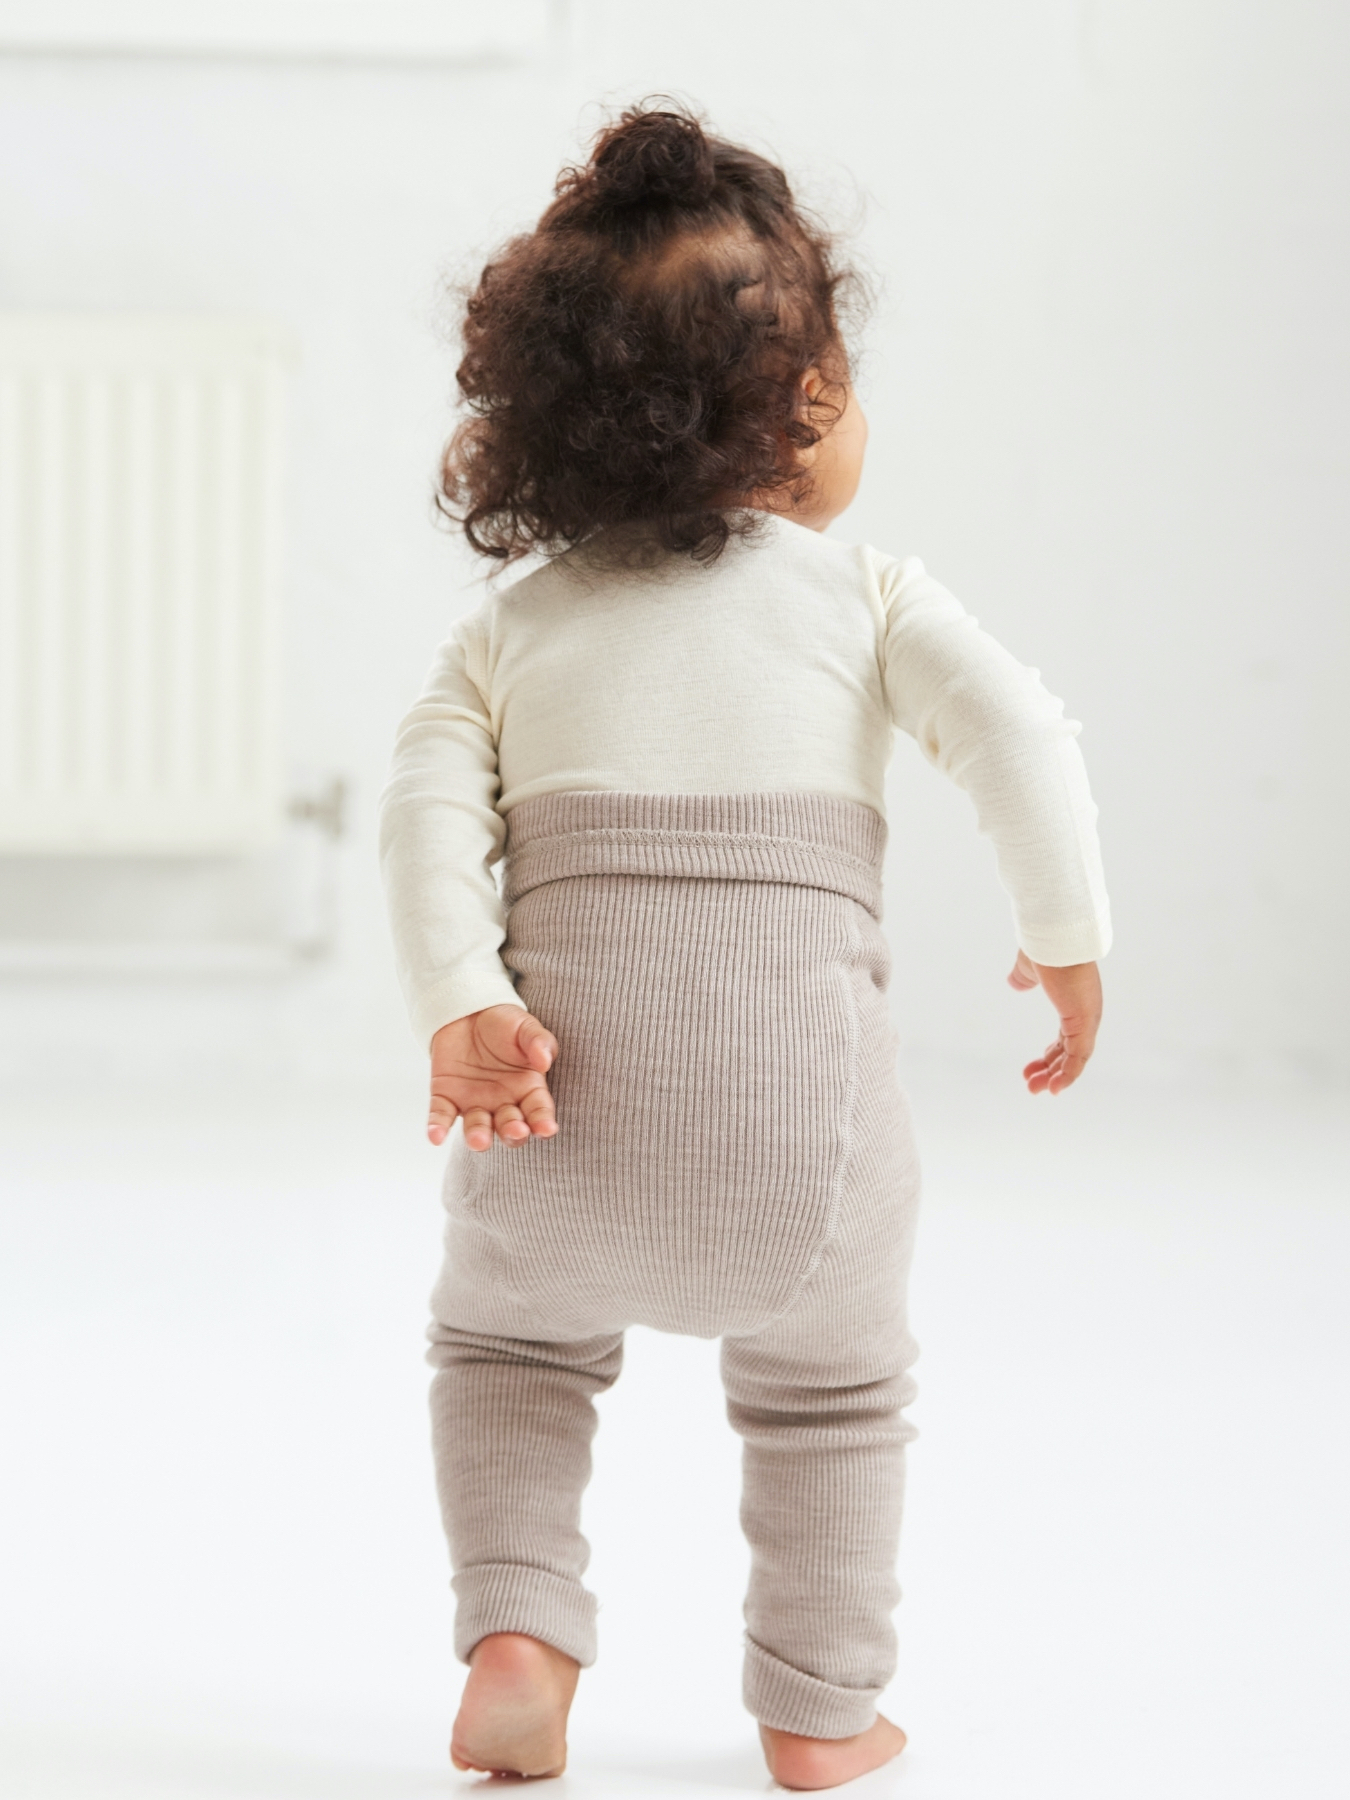 Ruskovilla's wool nappy pants for toddlers